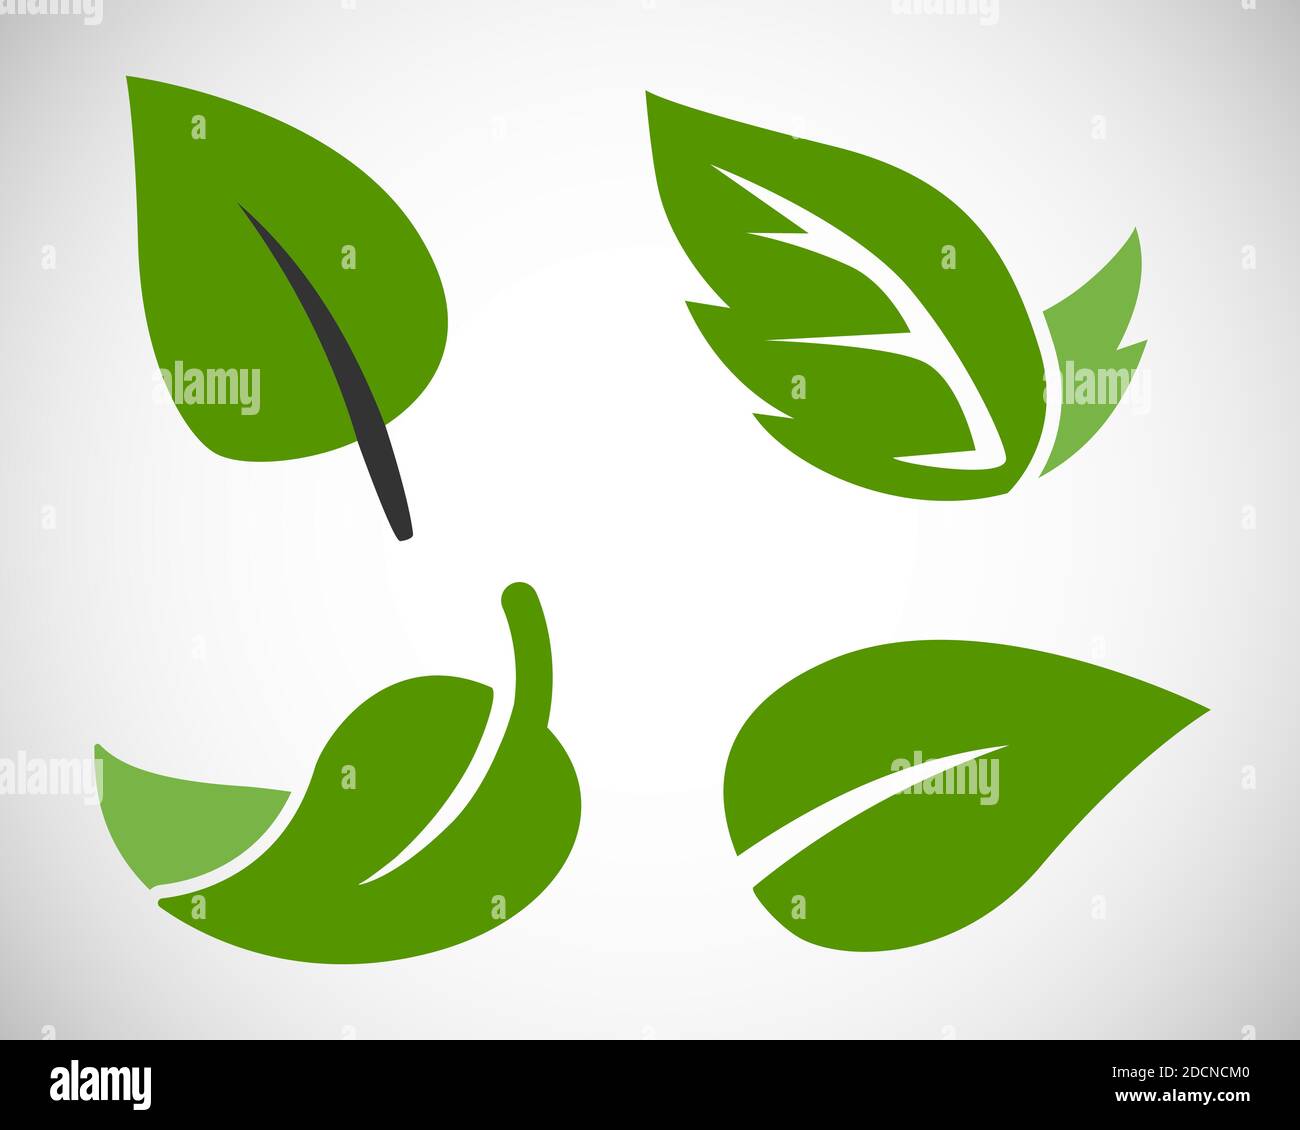 Different leaf icons and symbols for ecology or agriculture Stock Vector